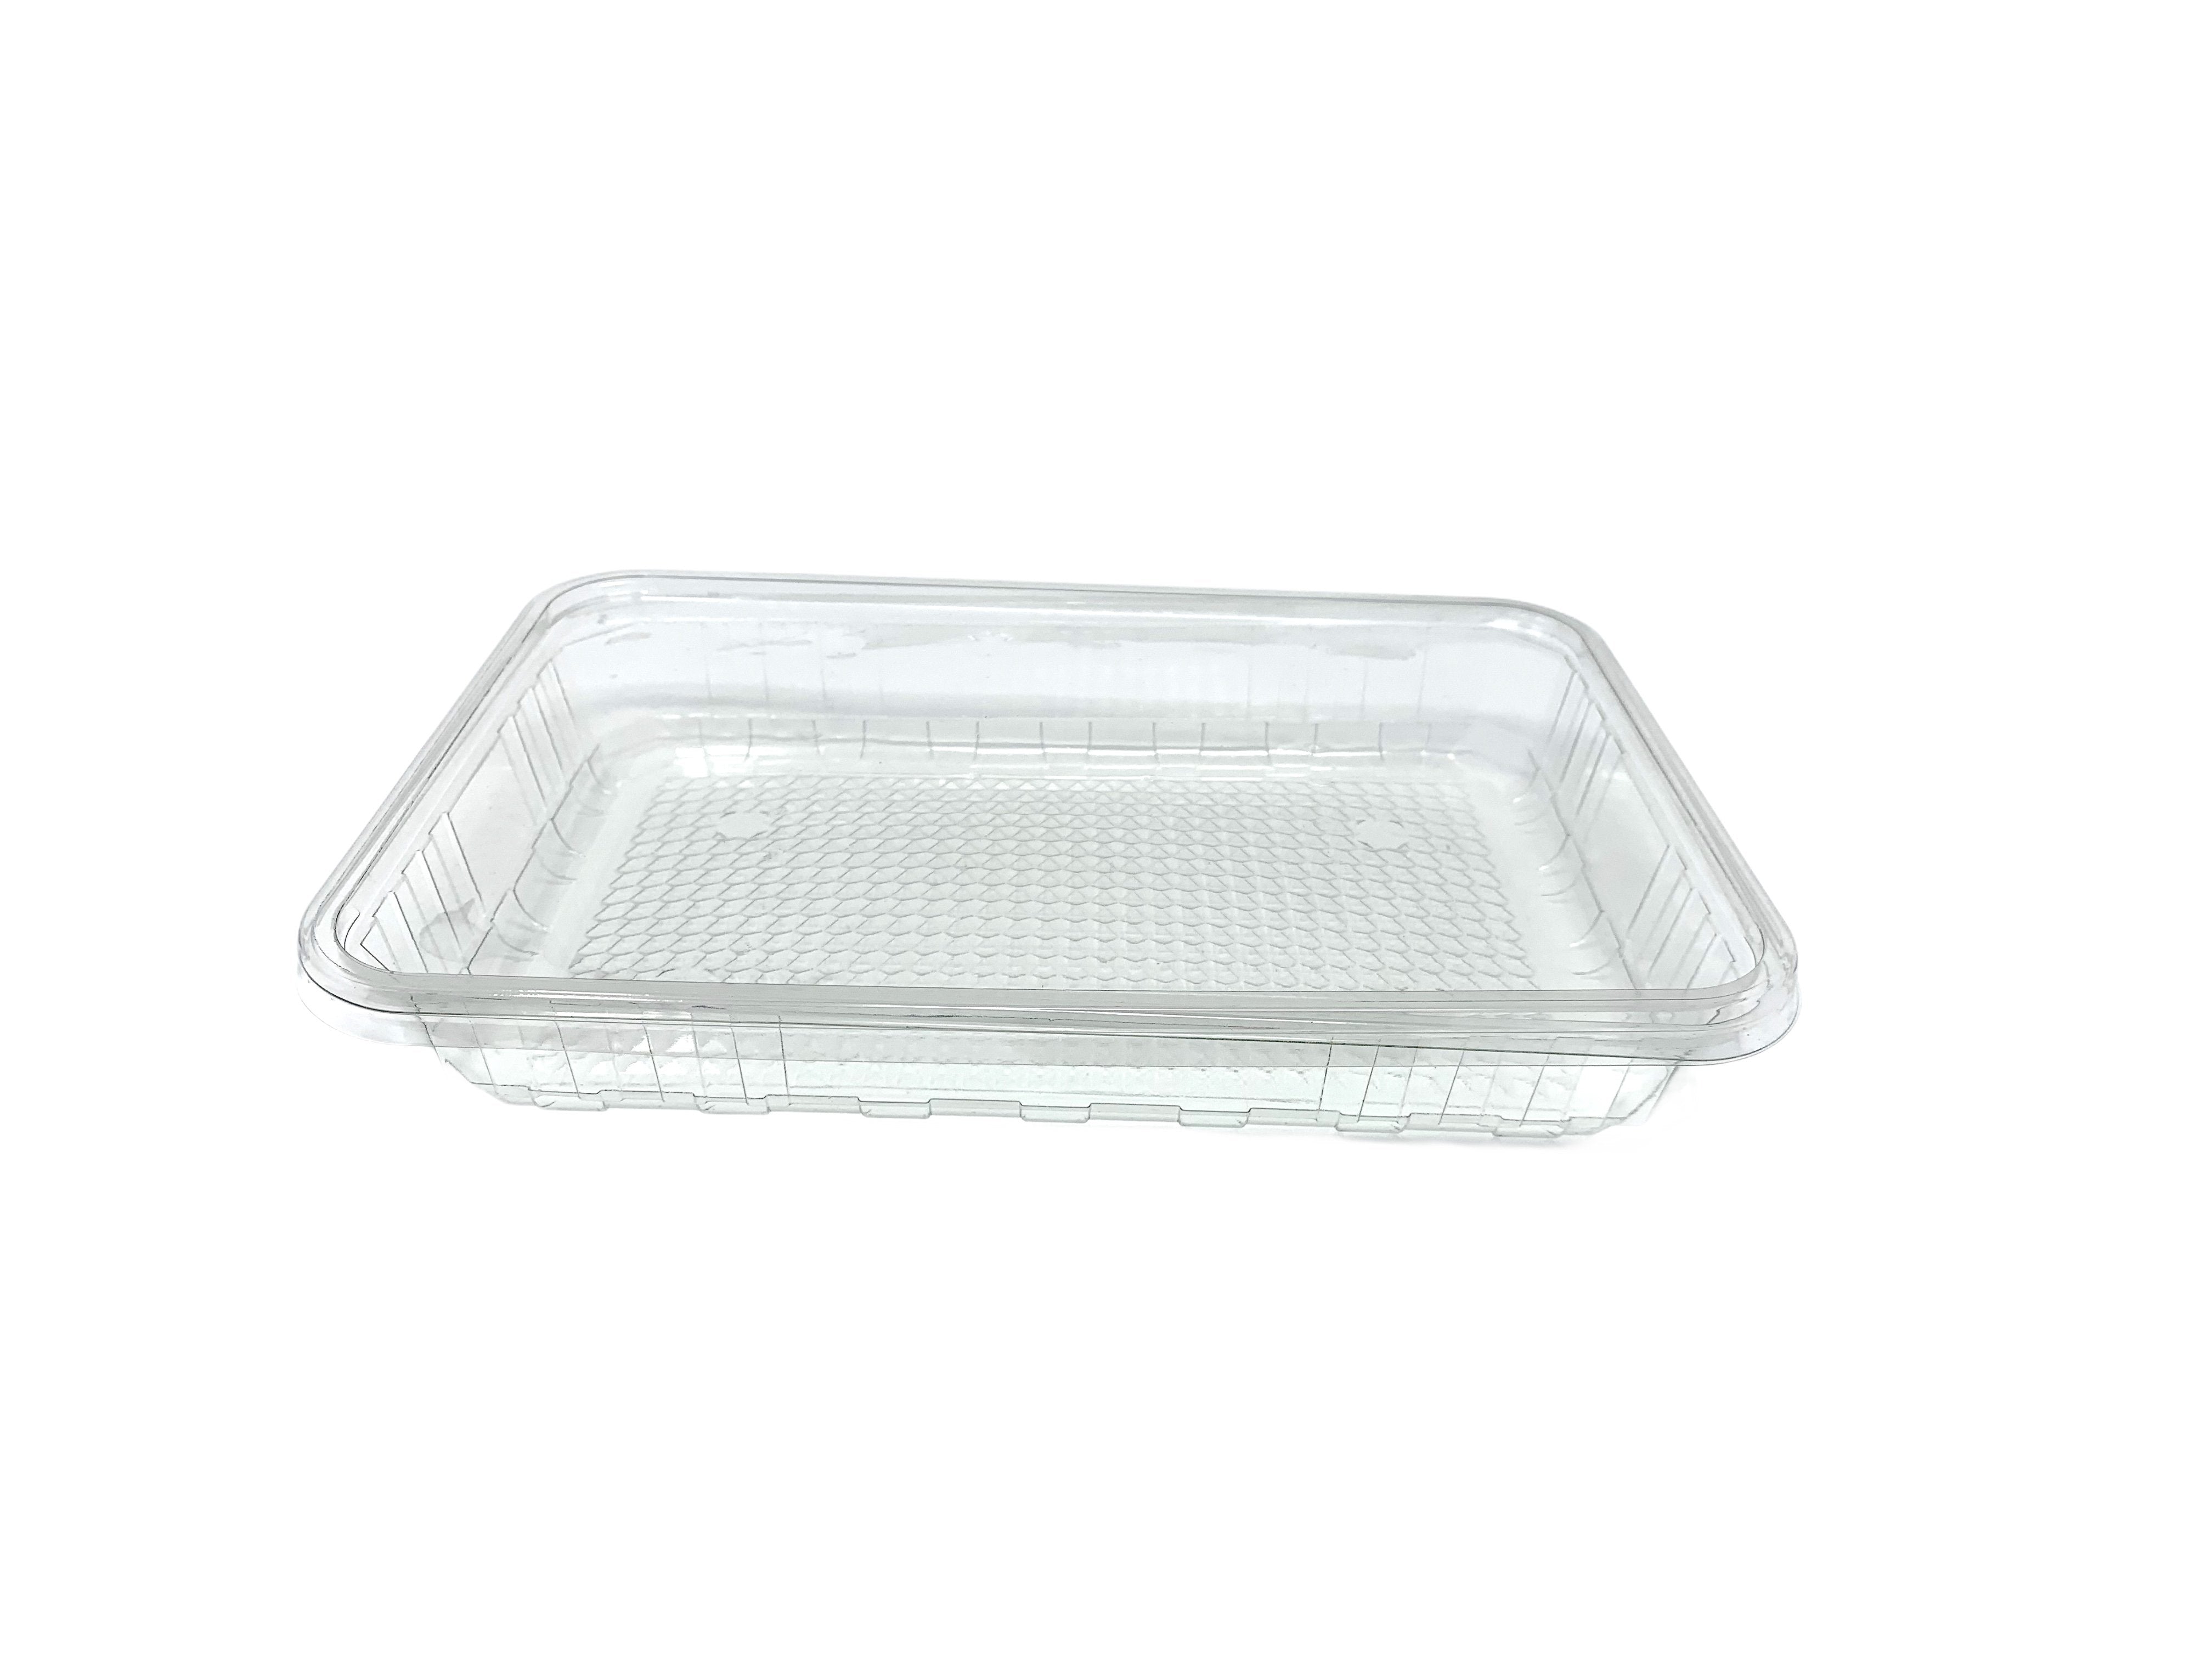 270x180x40 Bakery Container Bases & Lids - Gafbros